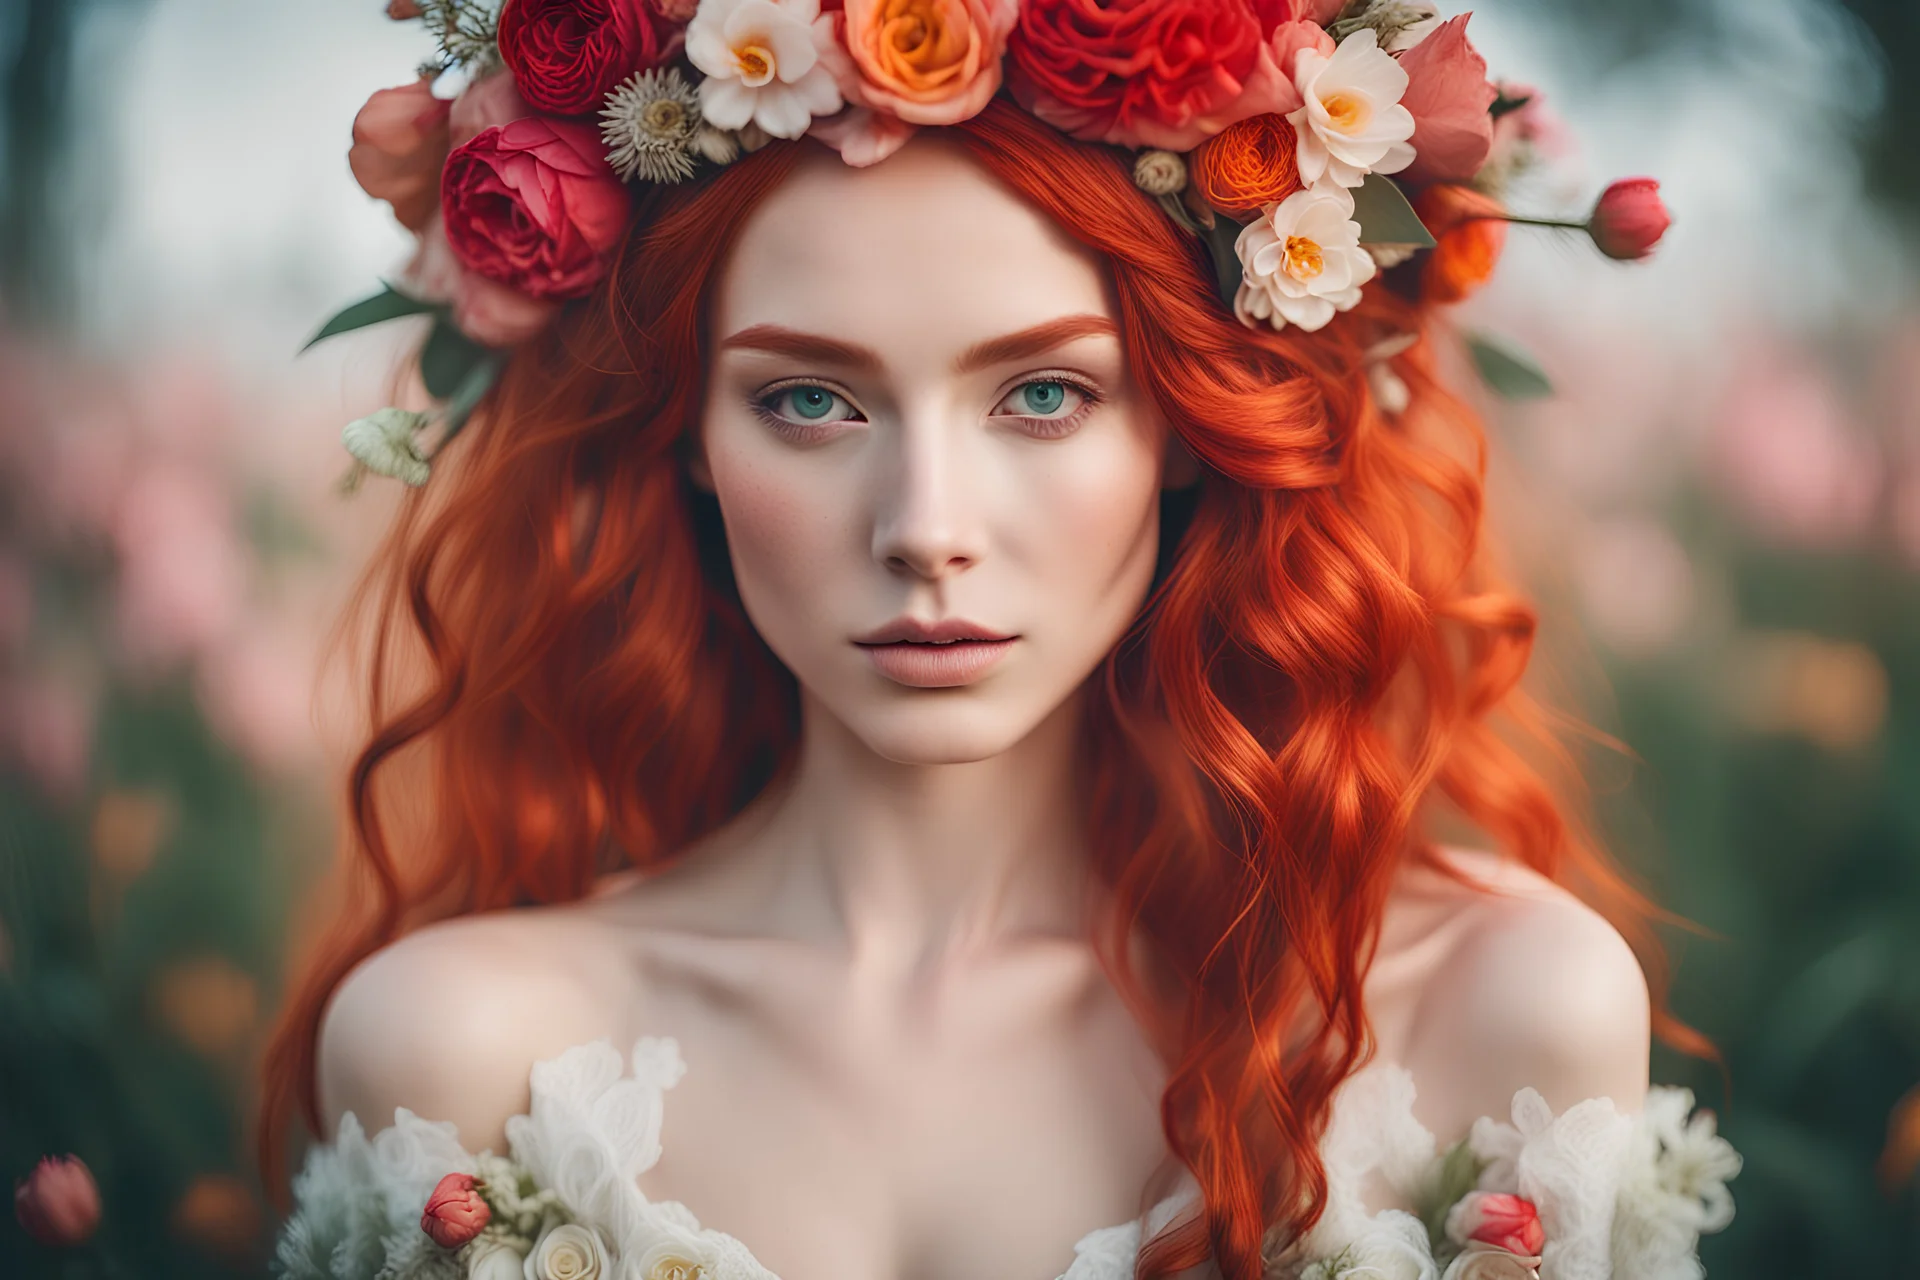 A photo of a (woman adorned with flowers:1.3), (vivid red hair:1.2), (piercing gaze:1.4), floral headpiece, (soft petals against skin:1.1), (natural beauty:1.2), (contrast of colors:1.3), intimate portrait, Canon EOS 5D Mark IV, 1/200s, f/2.8, ISO 100, (depth of field:1.1), (delicate bloom textures:1.2), (poetic composition:1.3).